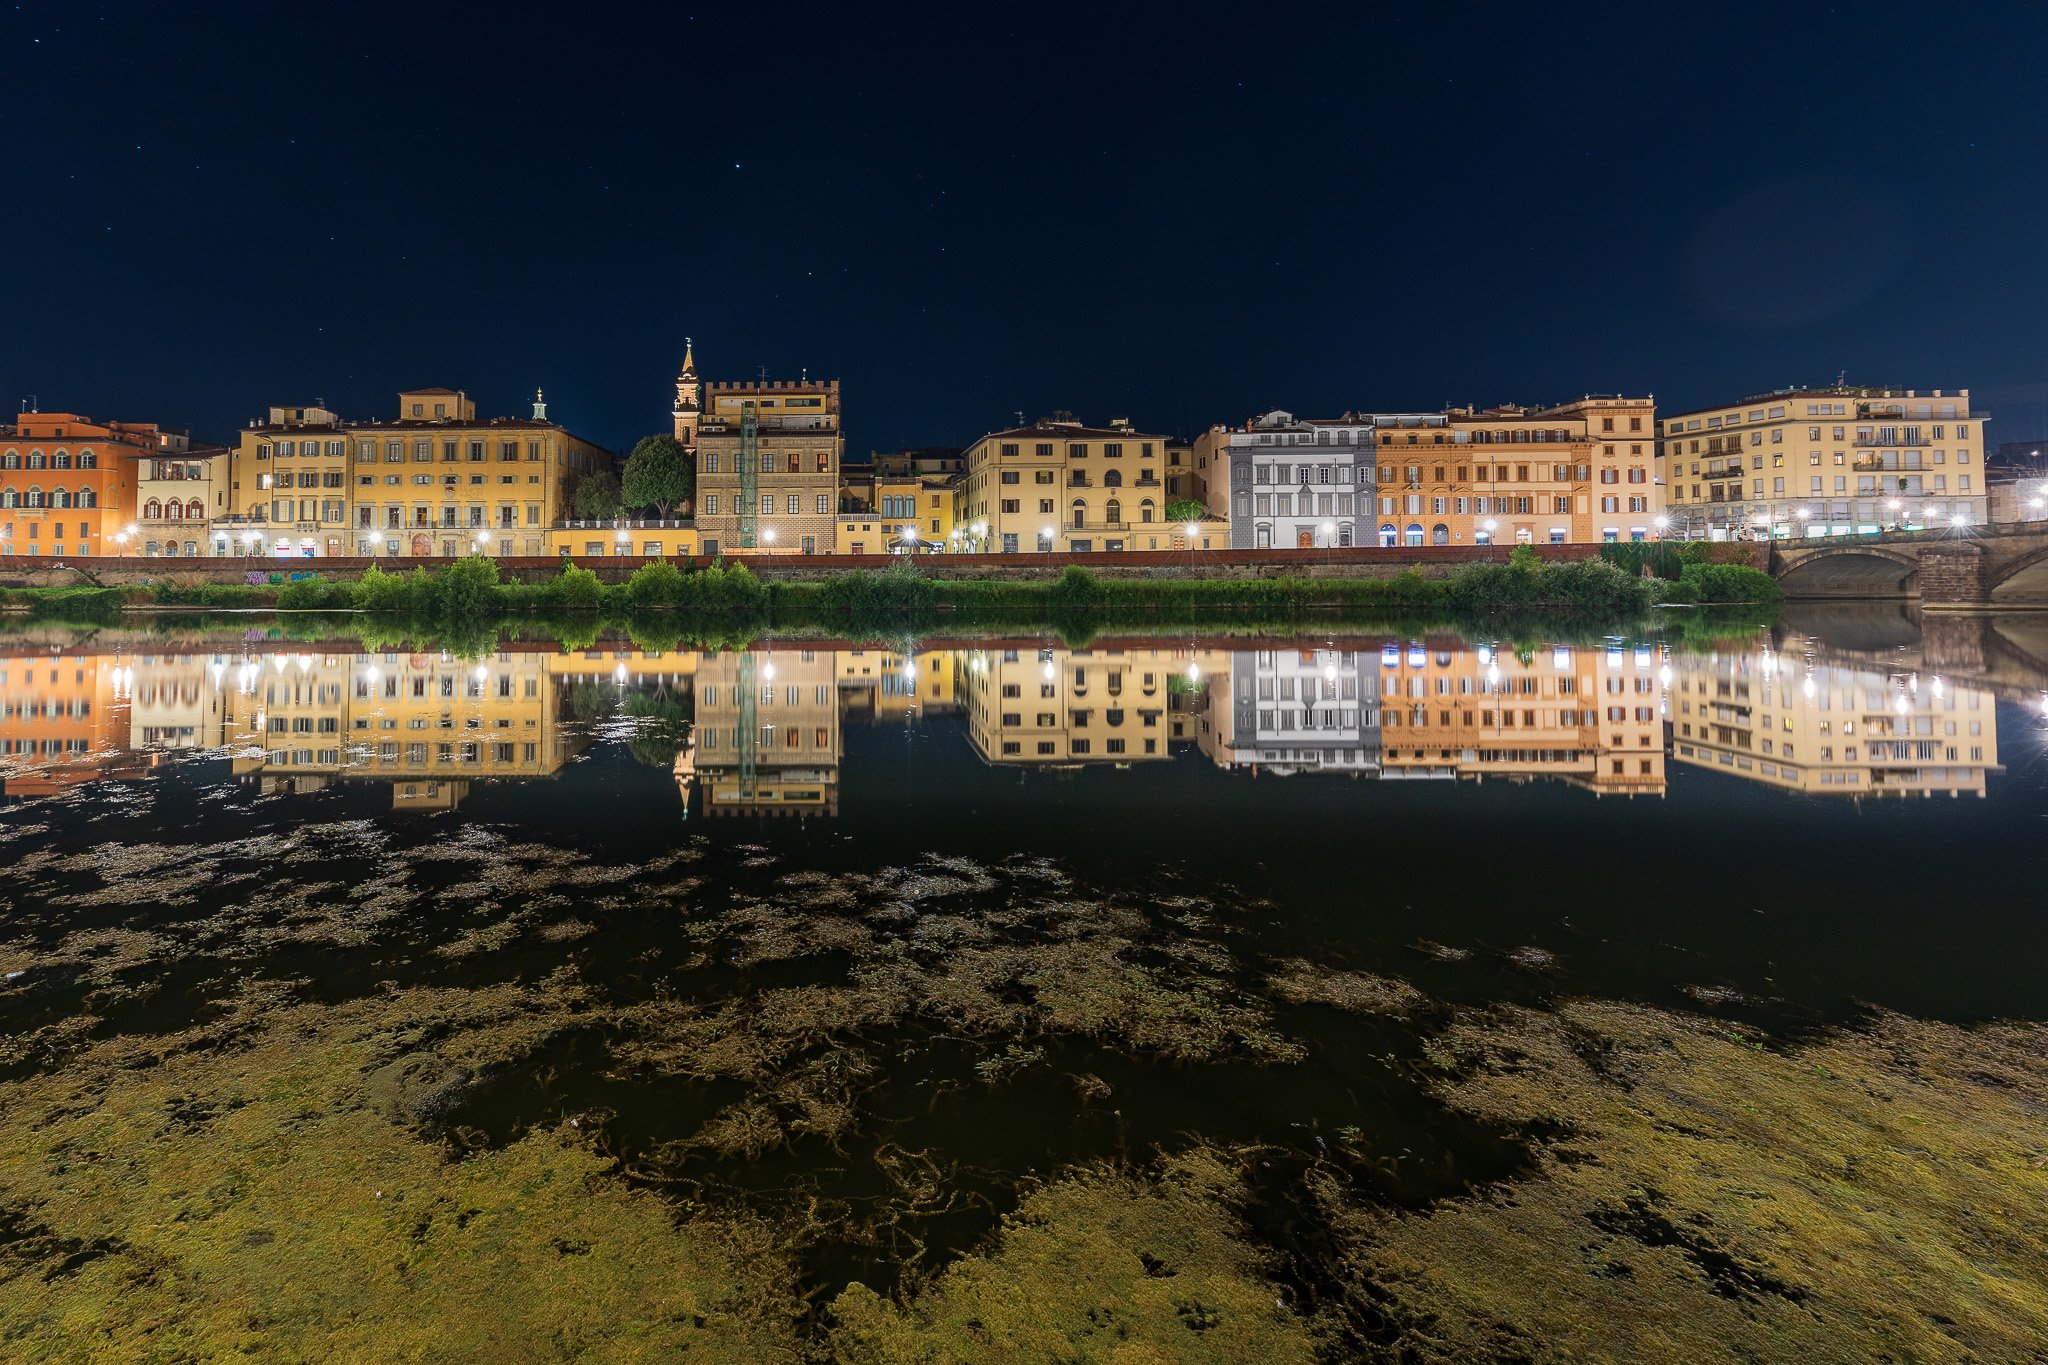 Florence, Italy-2531-July 26, 2019.jpg